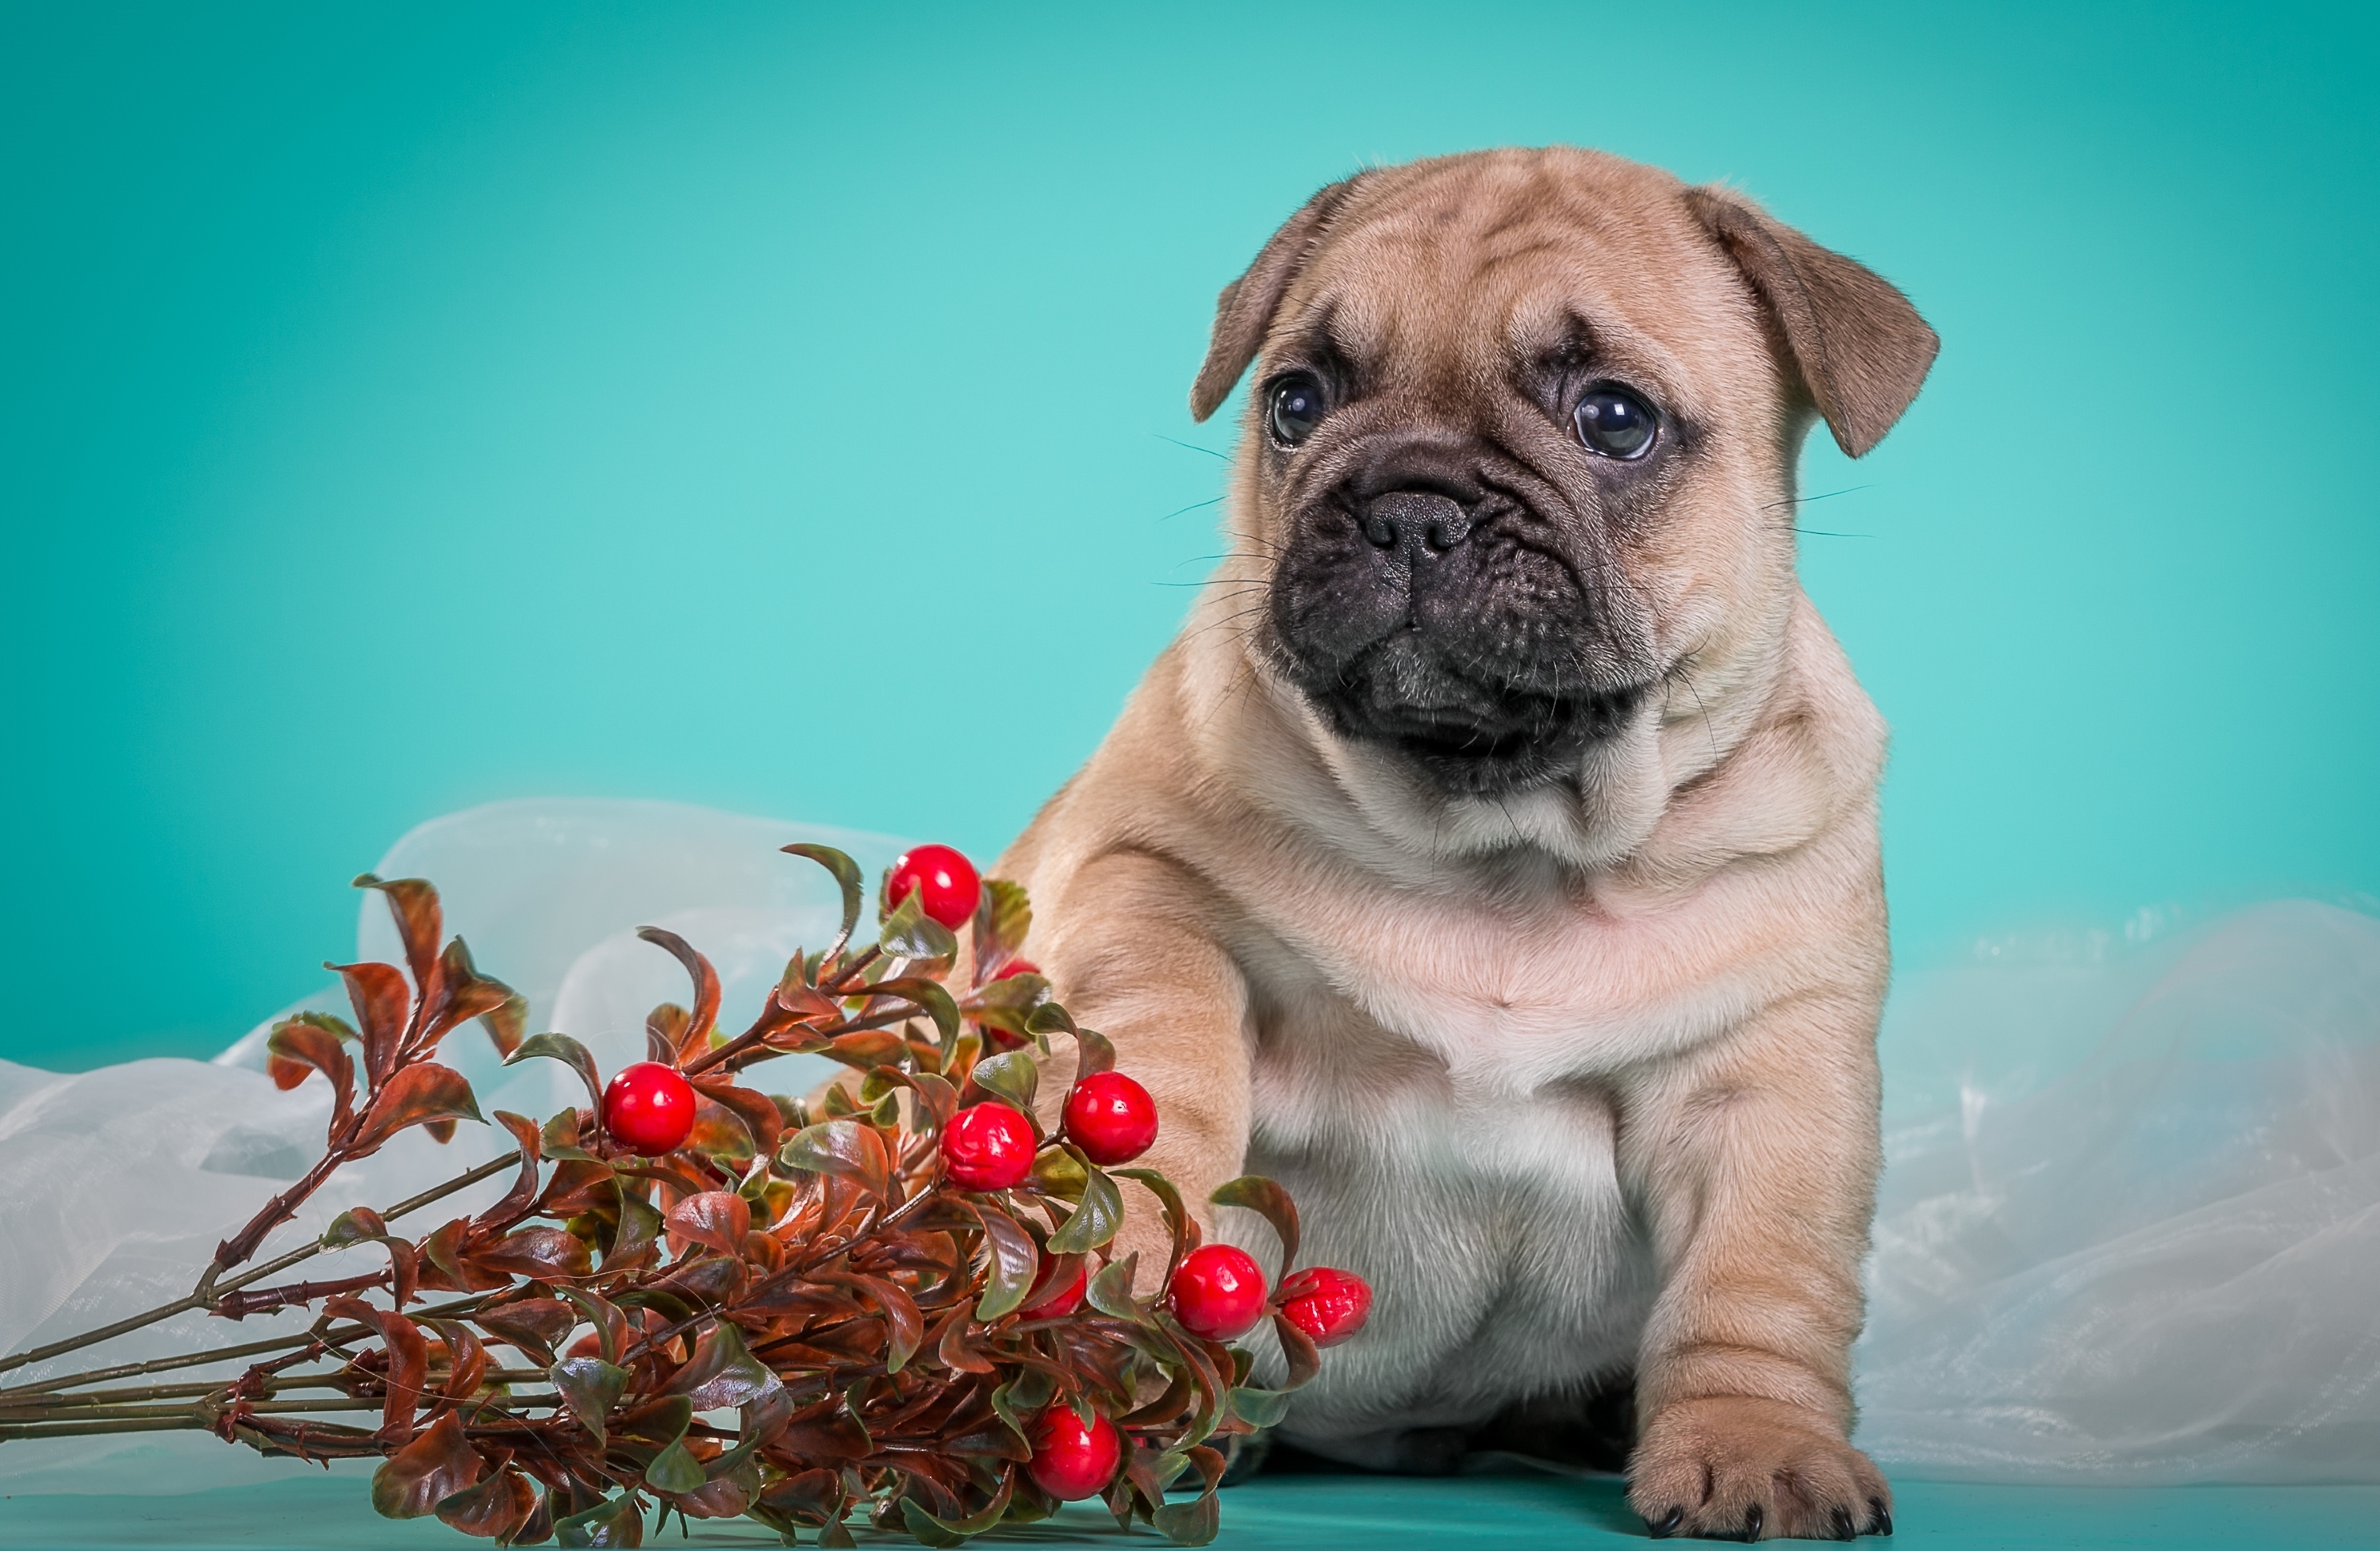 Free download Wallpaper french bulldog dog puppy cute cranberries